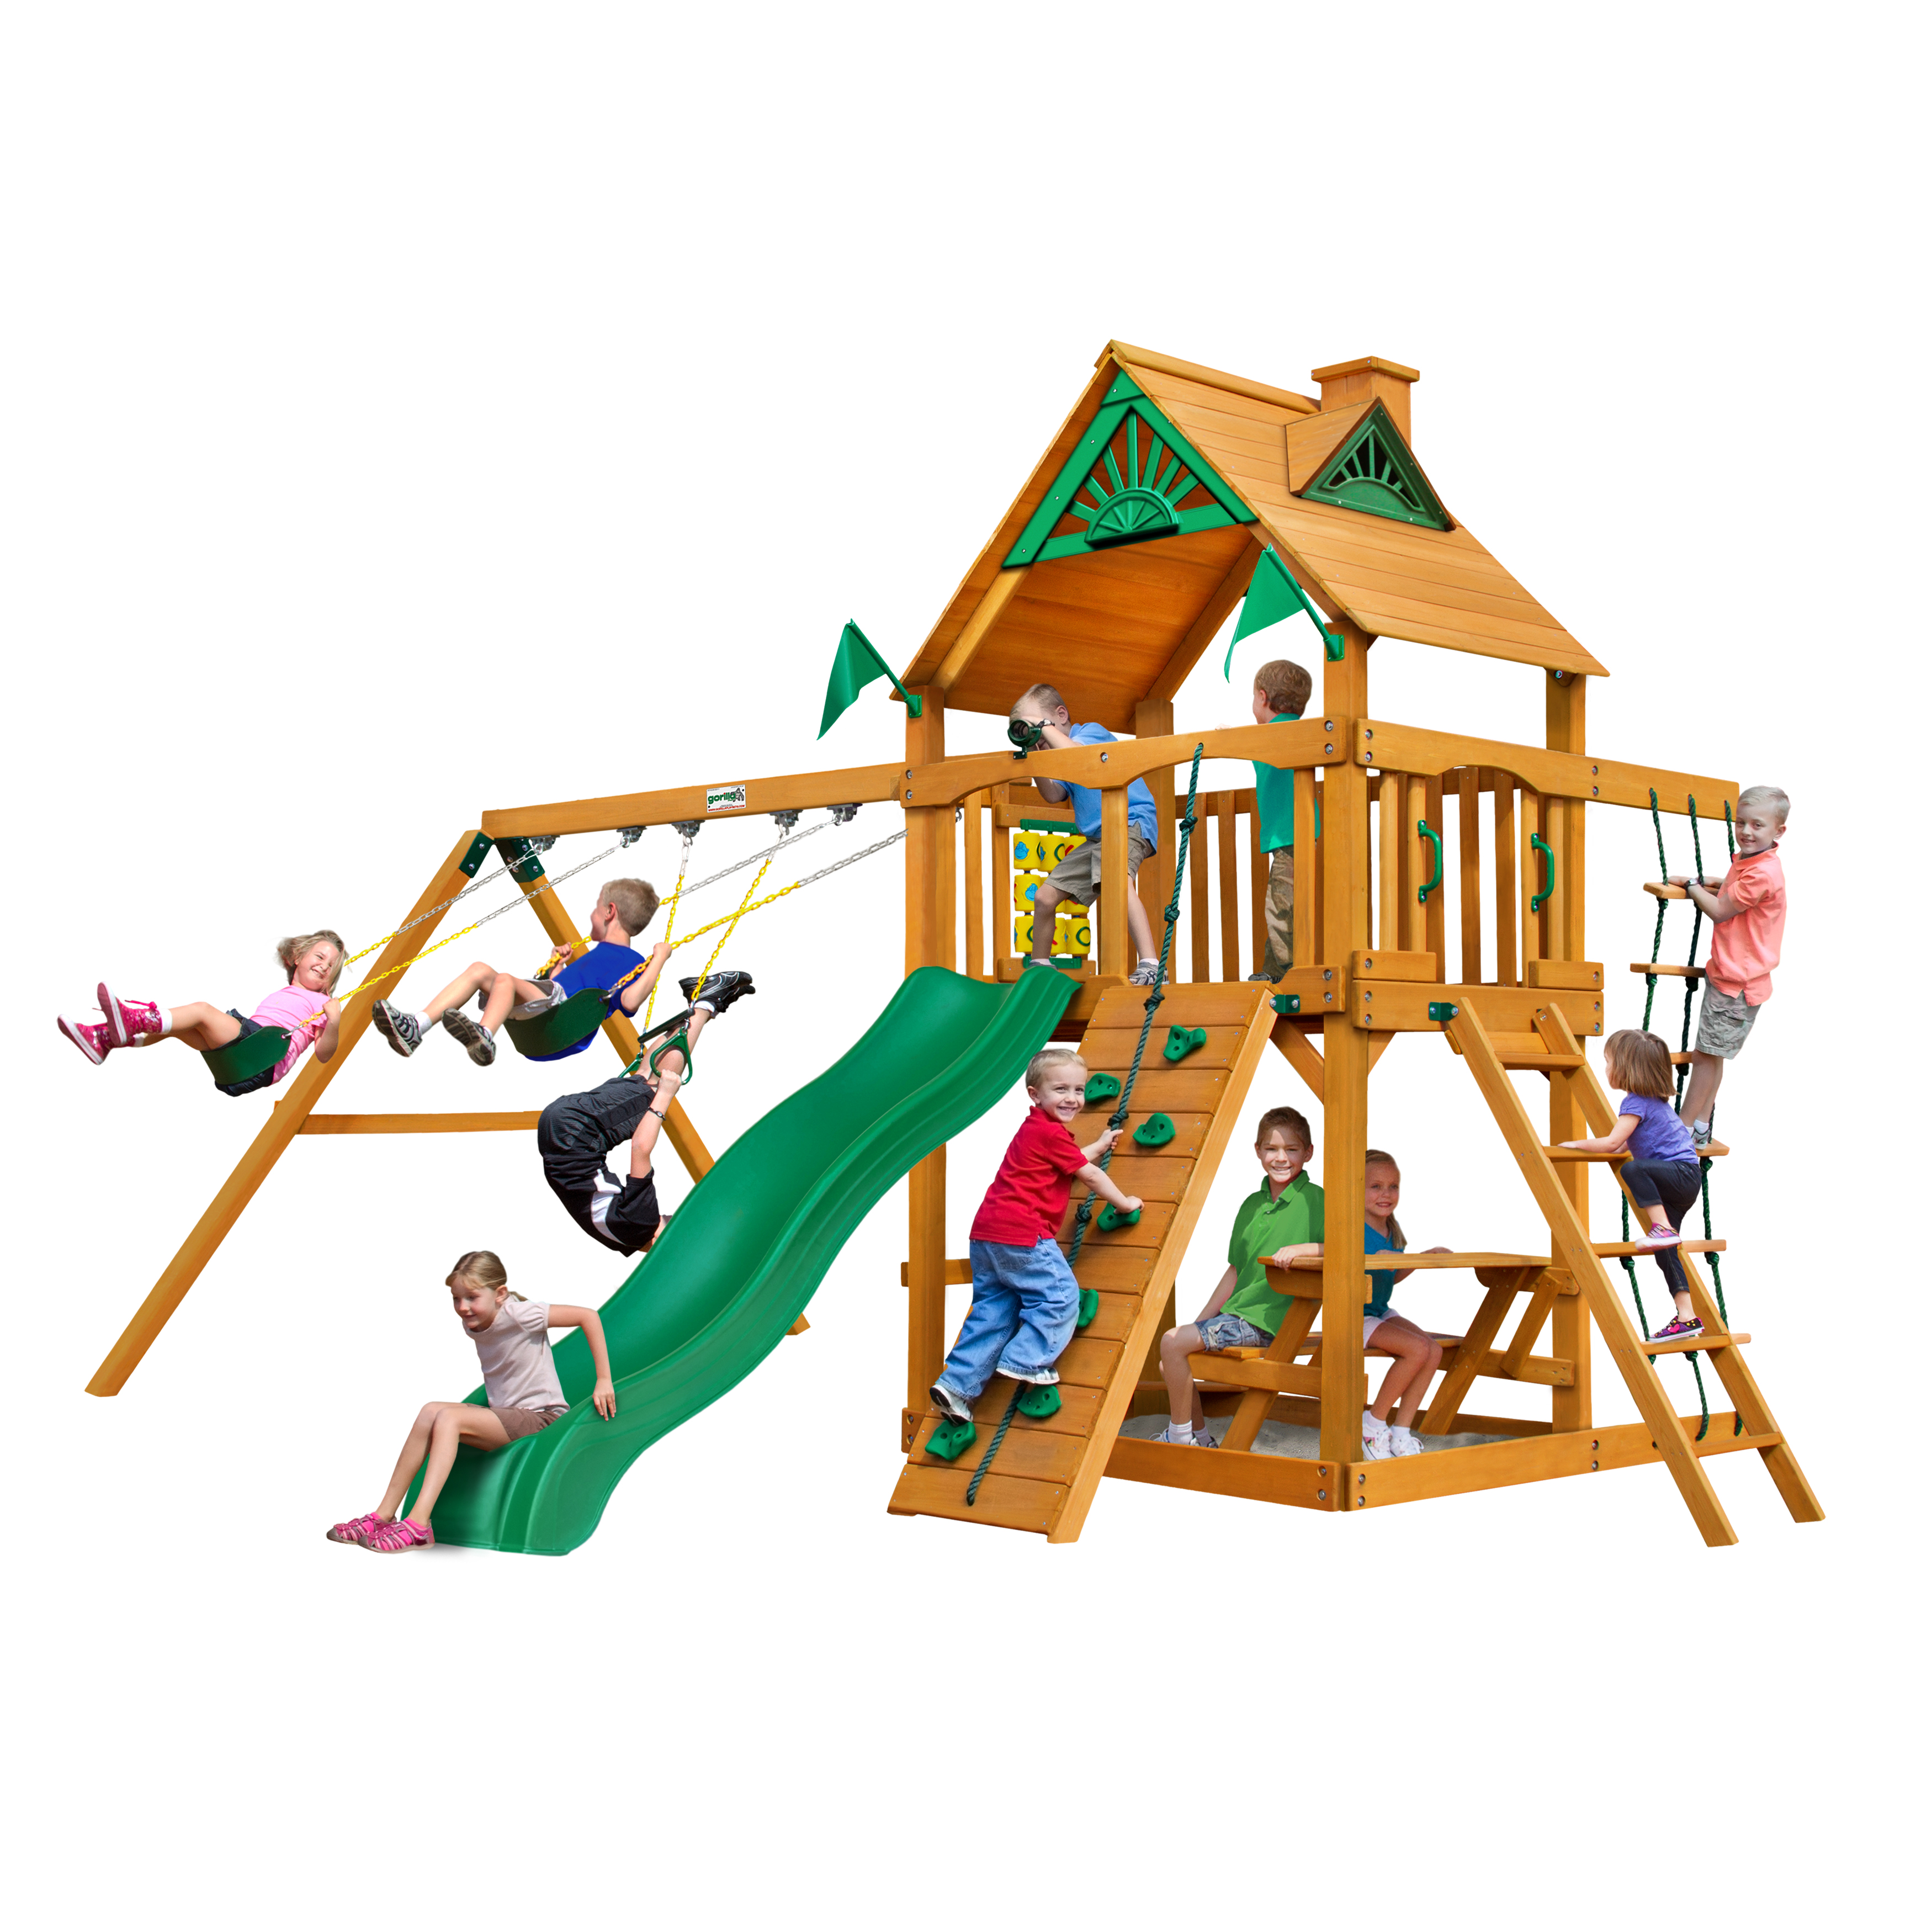 Gorilla Playsets Chateau Cedar Swing Set with Natural Cedar Posts - image 1 of 15